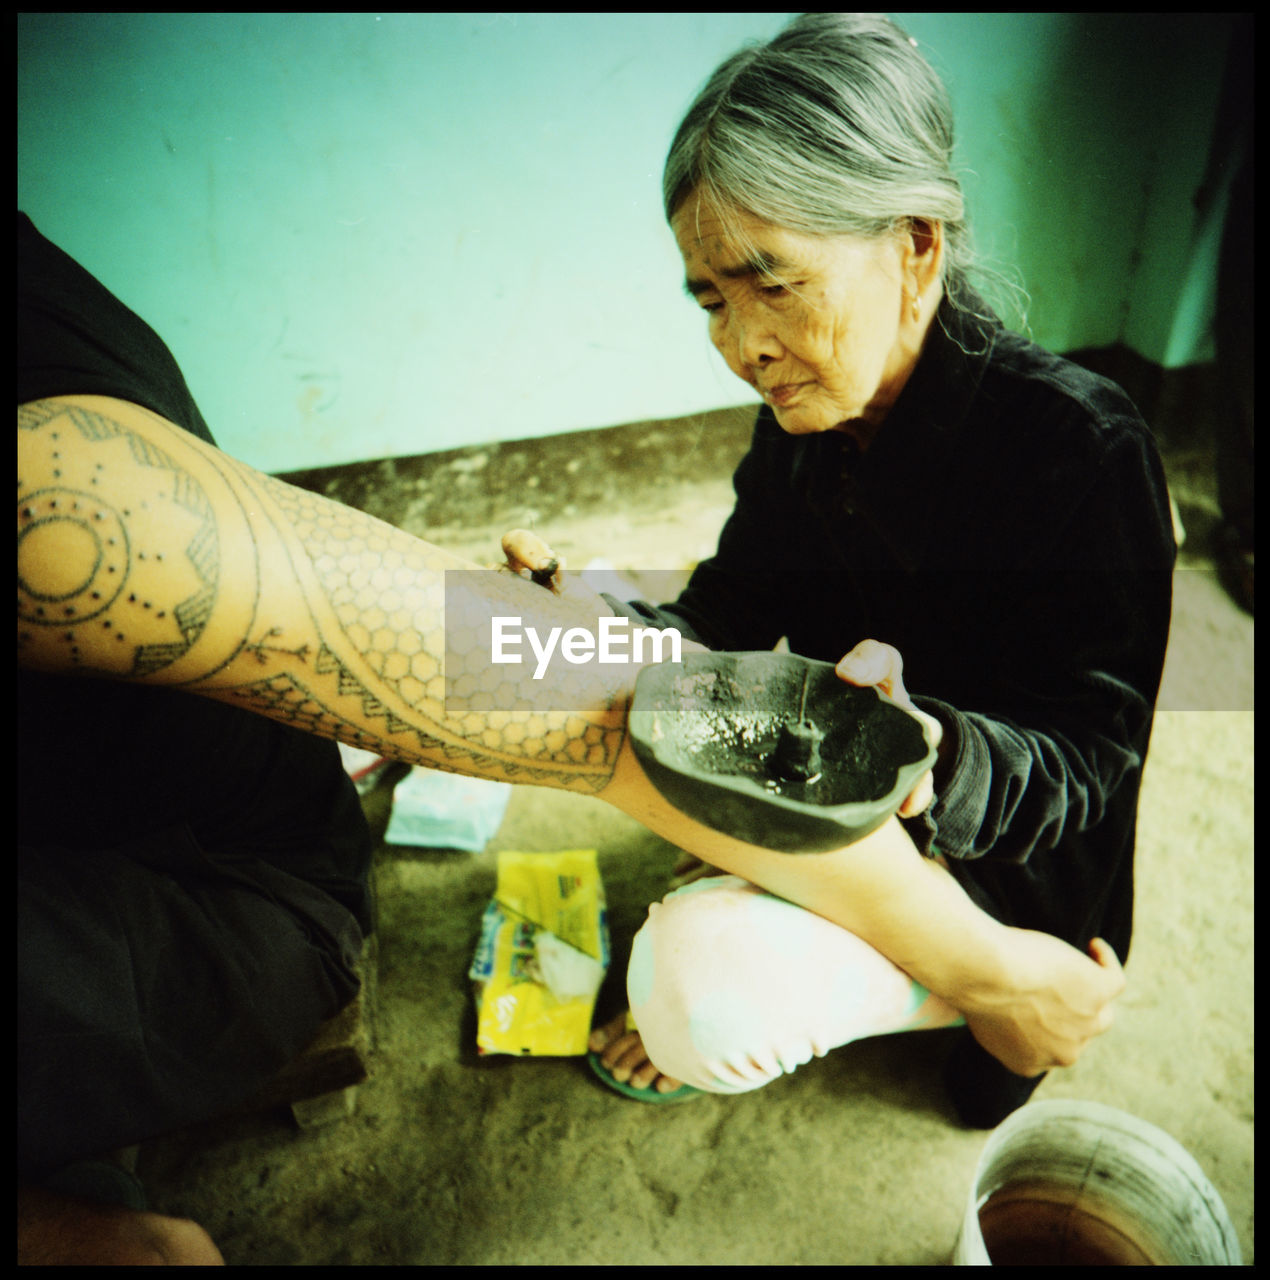 Apo Whang Od - the oldest tattoo artist in the world. The hundred year old still works everyday in her village Buscalan in the Kalinga mountains of Northern Luzon in the Philippines Adventure Age Analogue Photography Apo Whang Od Buscalan Philippines Film Photography Grace HERO Kalinga Mountains Northern Luzon Outdoors Pain Philippines Shadow Tattoo Tattoo Artist The Photojournalist - 2017 EyeEm Awards The Portraitist - 2017 EyeEm Awards Tradition Traditional Tattoo Traditional Tattoos Travel Wisdom Xpro